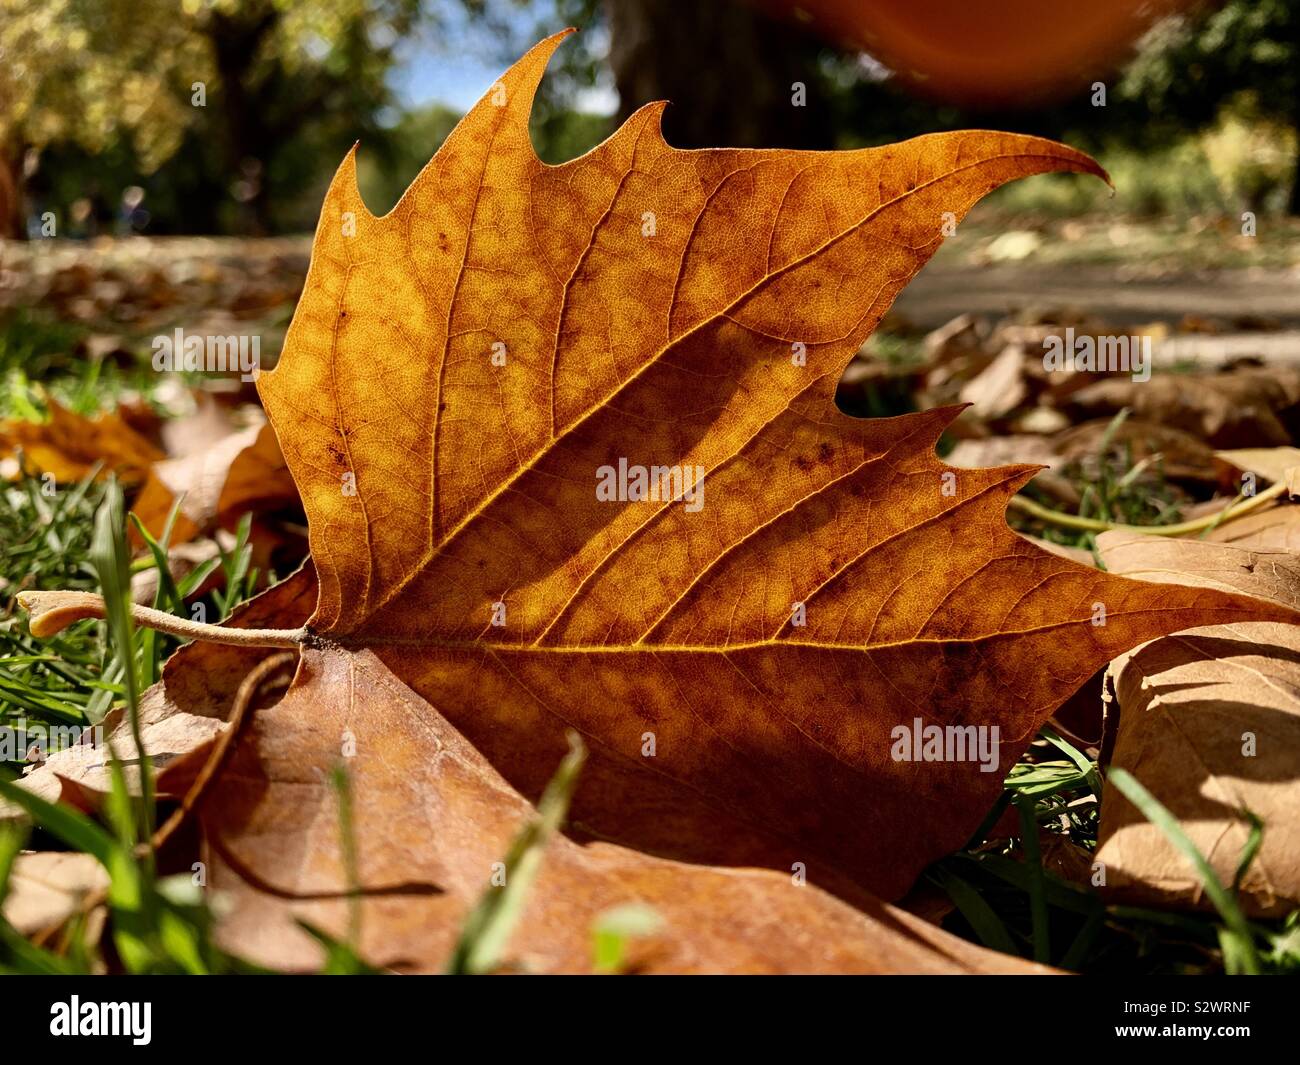 Dead Leaves On The Ground In London Fields Park London Stock Photo Alamy